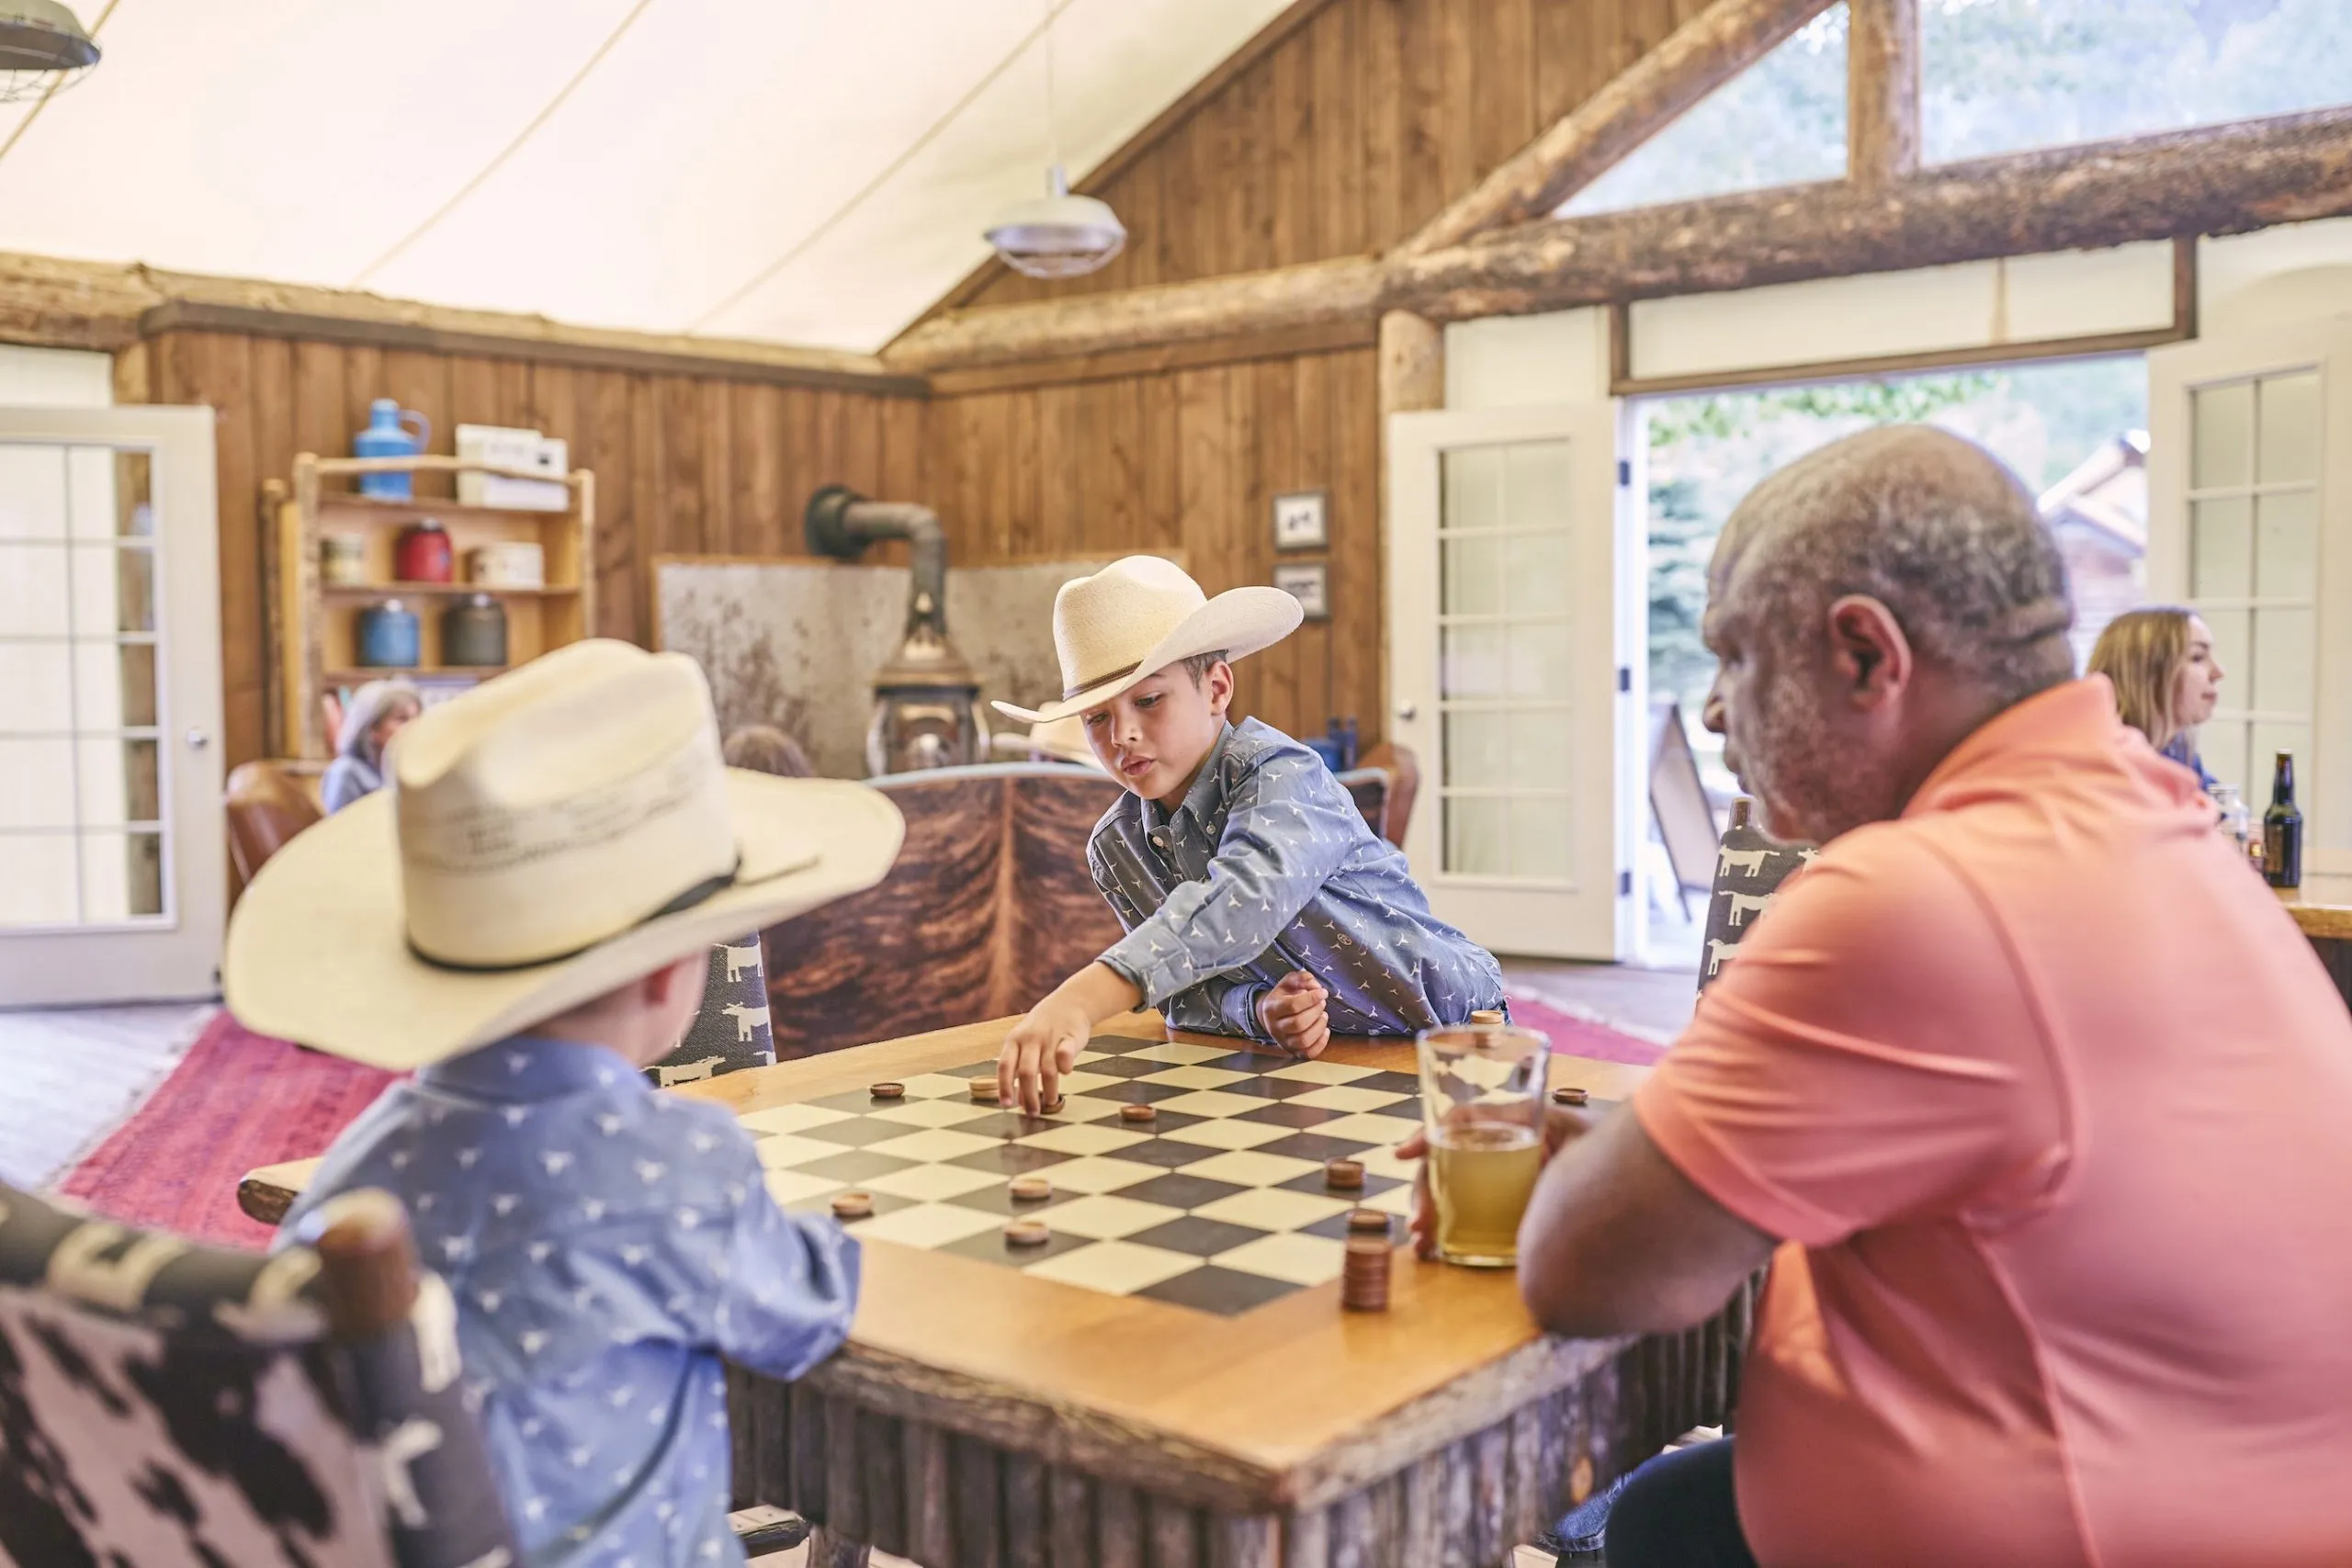 Children play checkers while a man watches